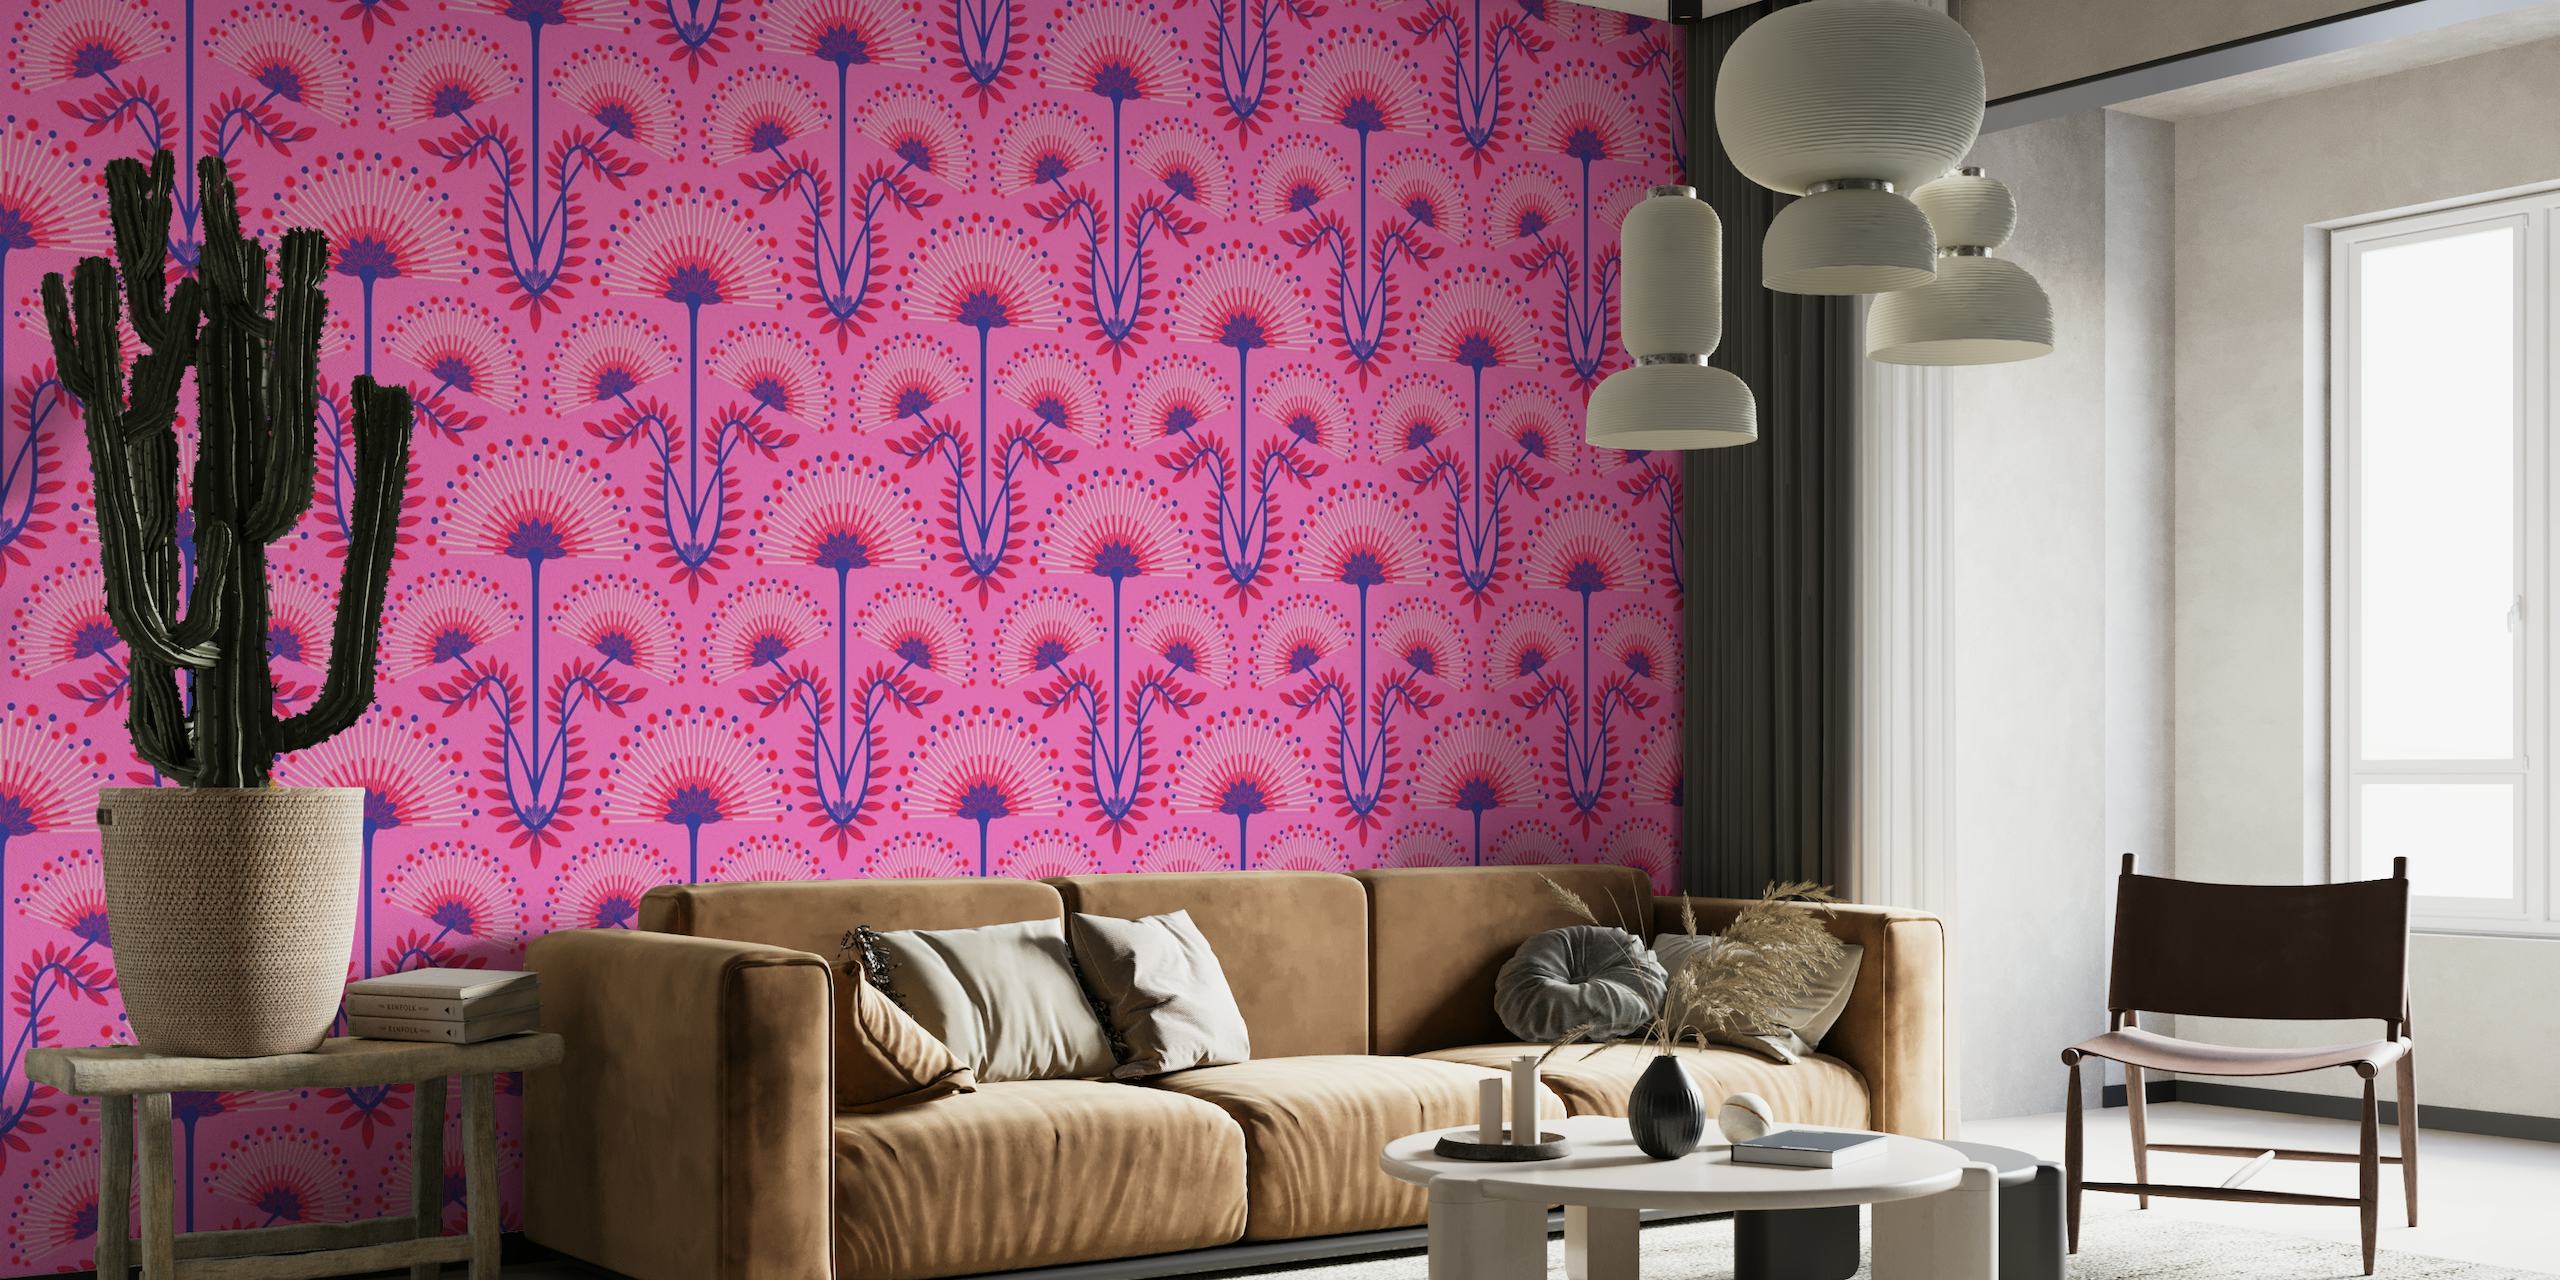 MIMOSA Art Deco Floral - Fuchsia Pink - Large tapety